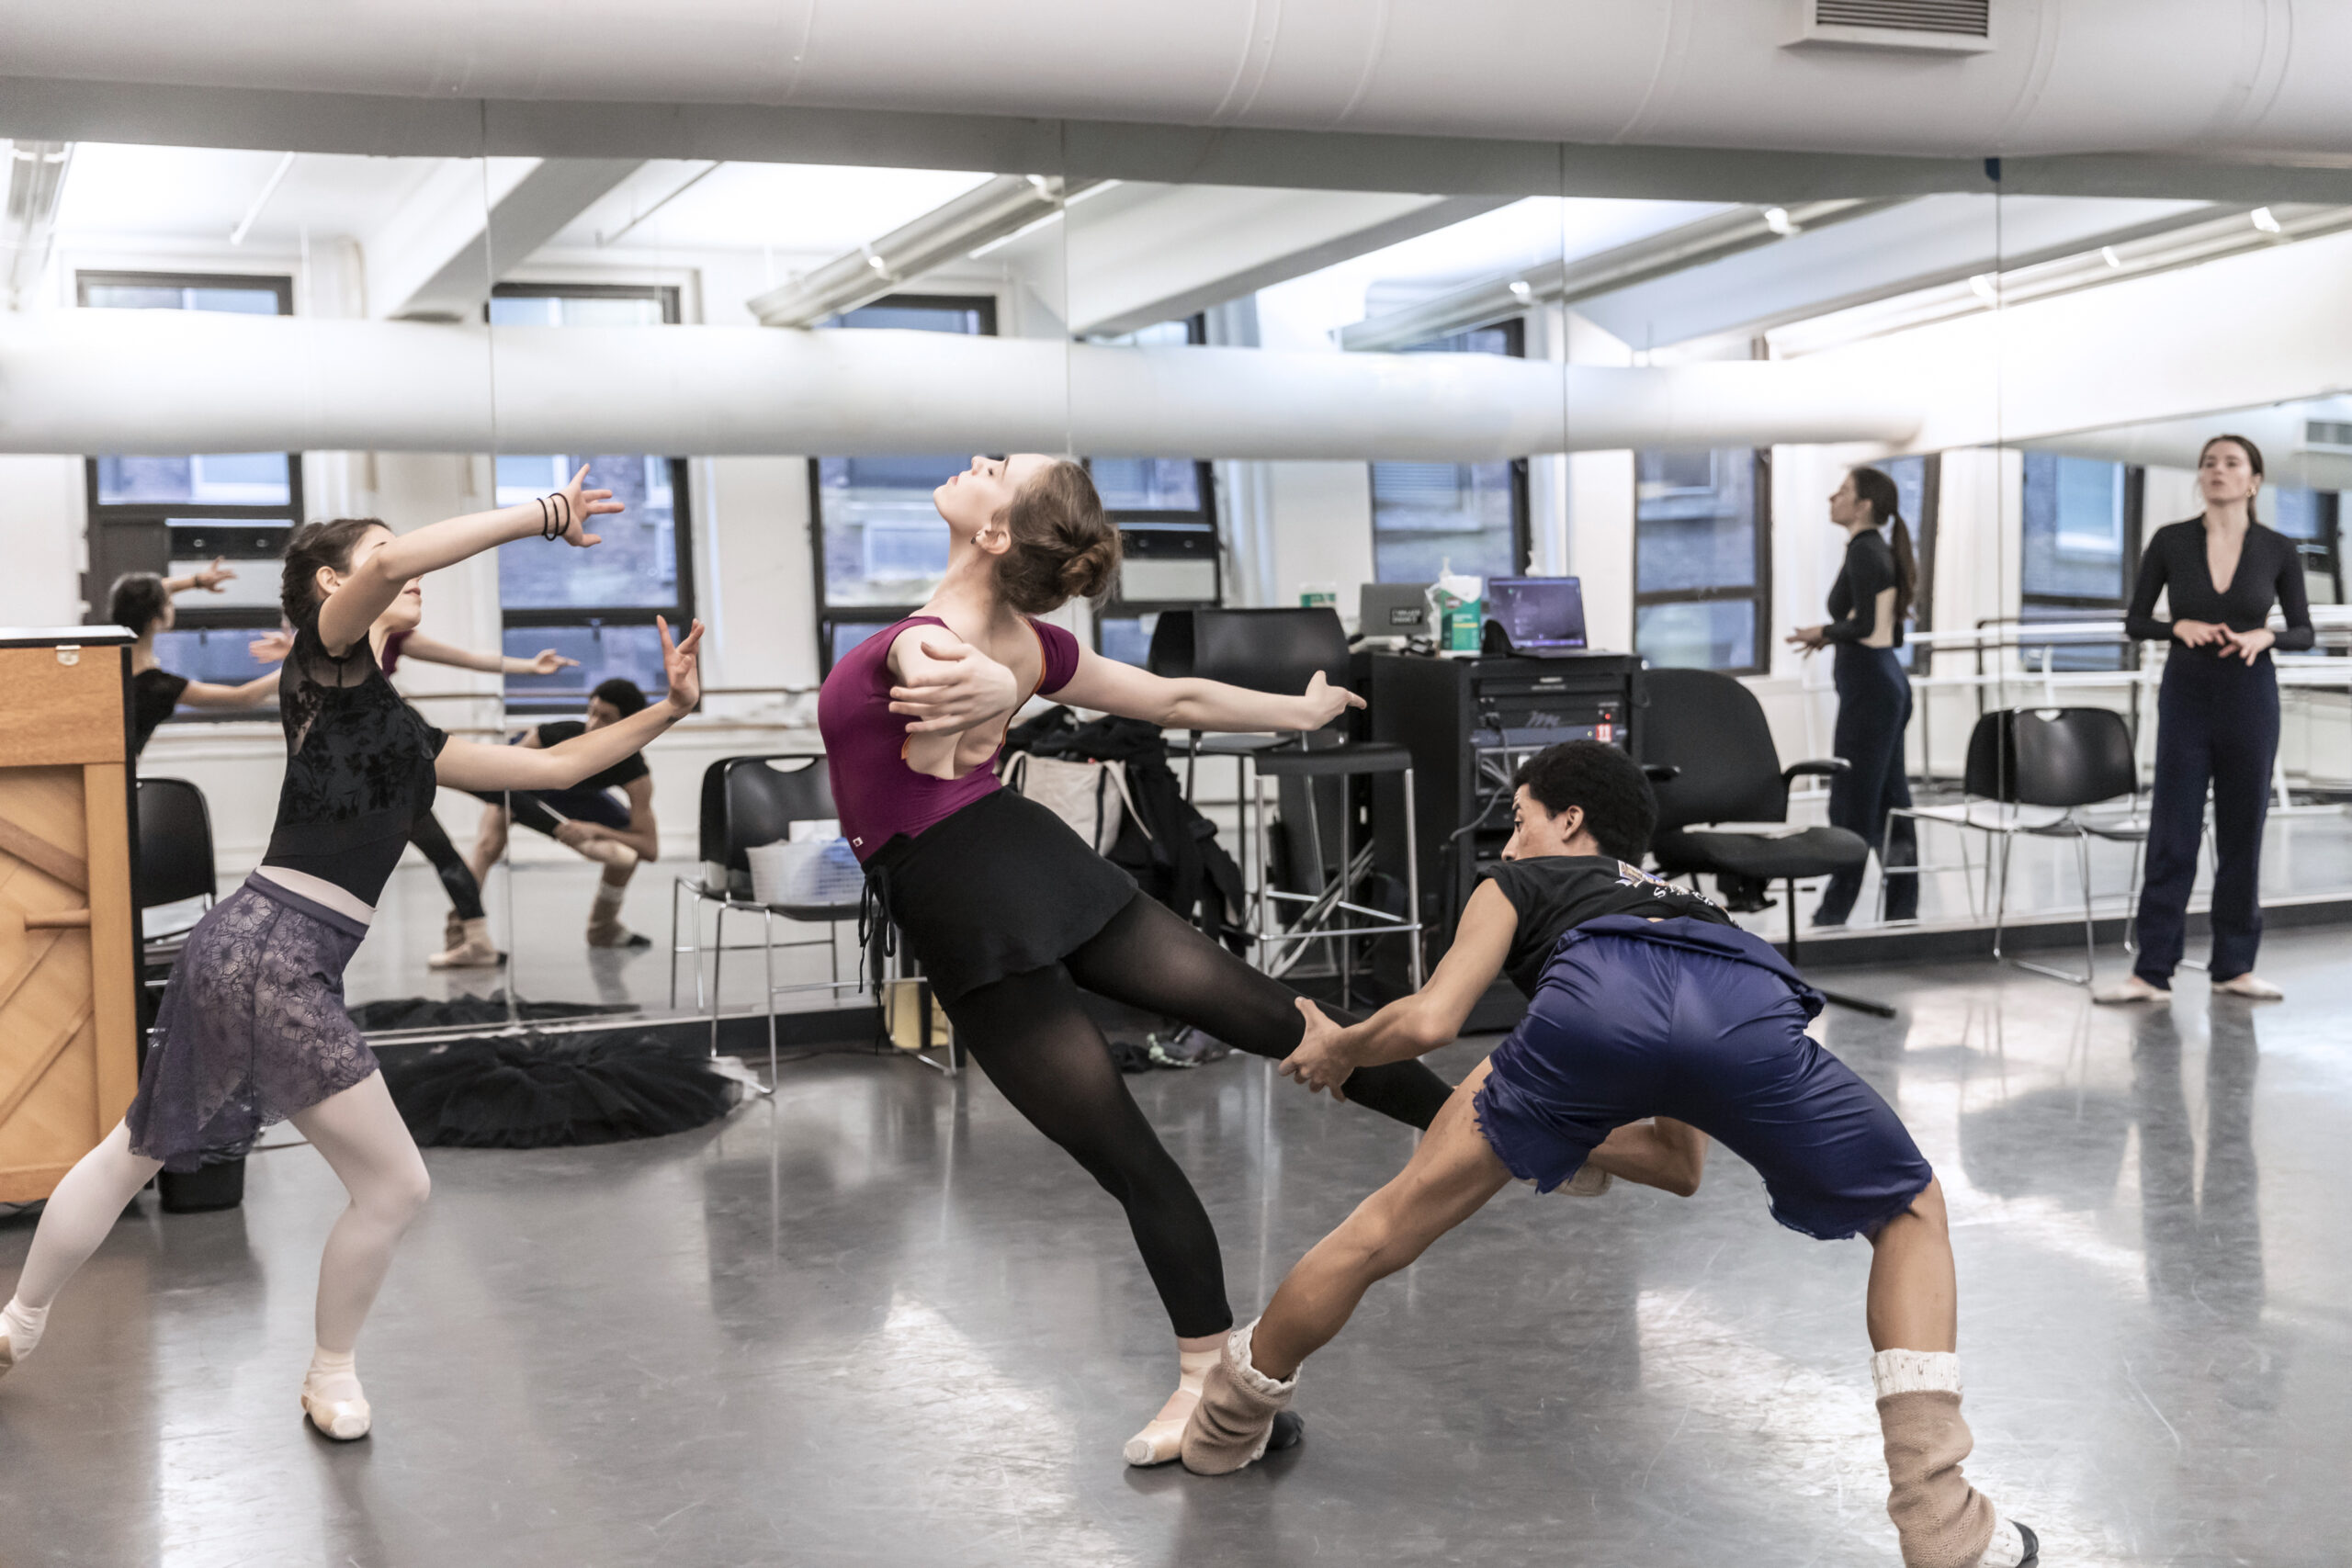 three dancers in the studio: one female learning back in arabesque, a male dancer supporting her leg, and another female reaching towards them in a lunge